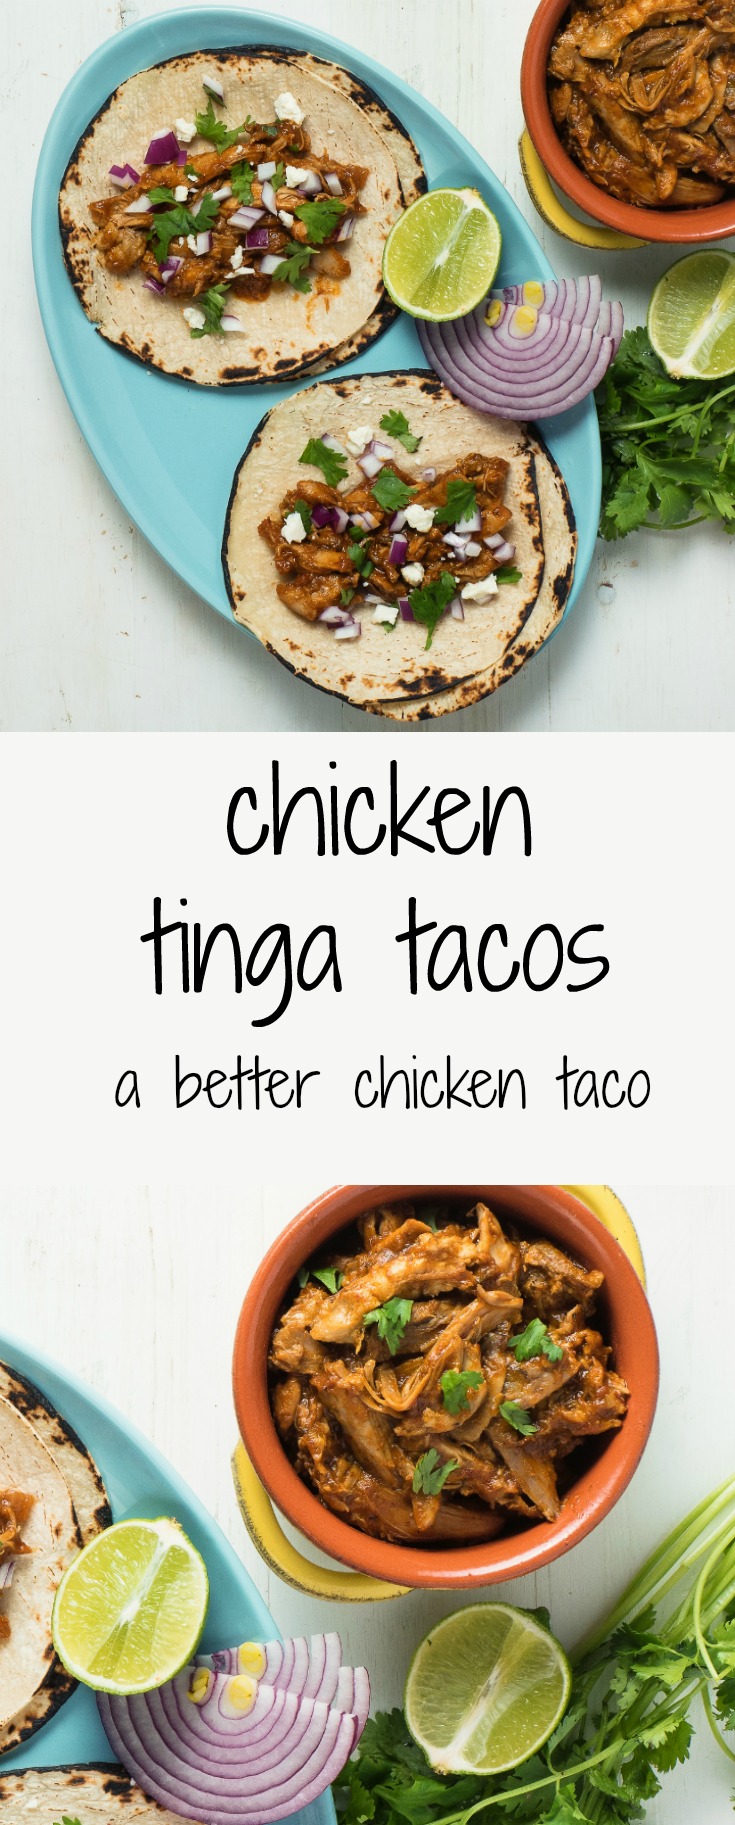 You can make chicken tinga tacos better than your local Mexican restaurant.